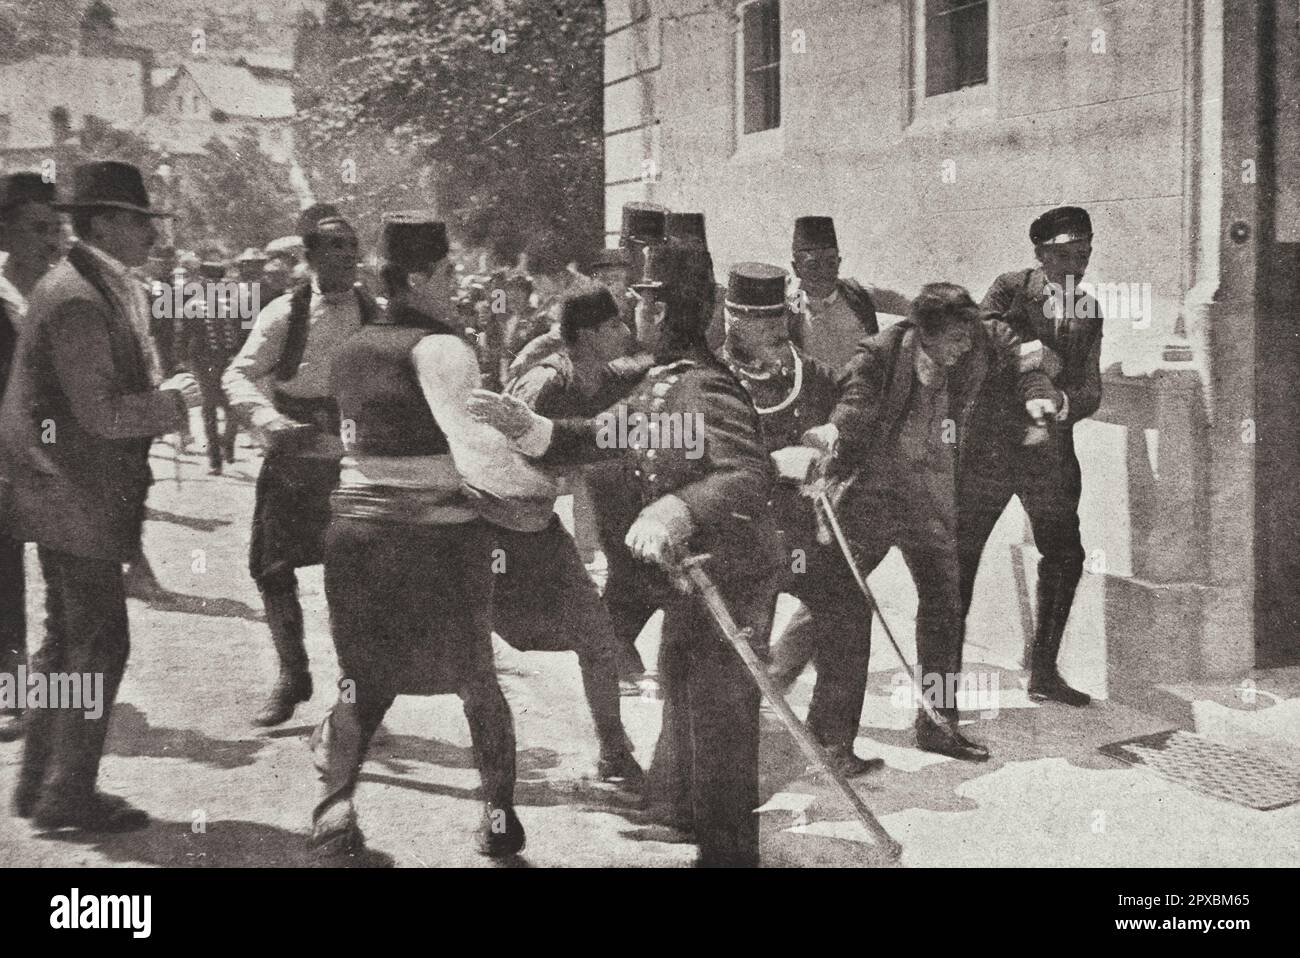 World War I. Sarajevo. Assassination of Archduke Franz Ferdinand. 1914  The drama accomplished, the public force and the crowd rush together on the assassin, who is dragged bruised and bleeding to the police station.  Archduke Franz Ferdinand of Austria, heir presumptive to the Austro-Hungarian throne, and his wife, Sophie, Duchess of Hohenberg, were assassinated on 28 June 1914 by Bosnian Serb student Gavrilo Princip. They were shot at close range while being driven through Sarajevo, the provincial capital of Bosnia-Herzegovina, formally annexed by Austria-Hungary in 1908. Stock Photo